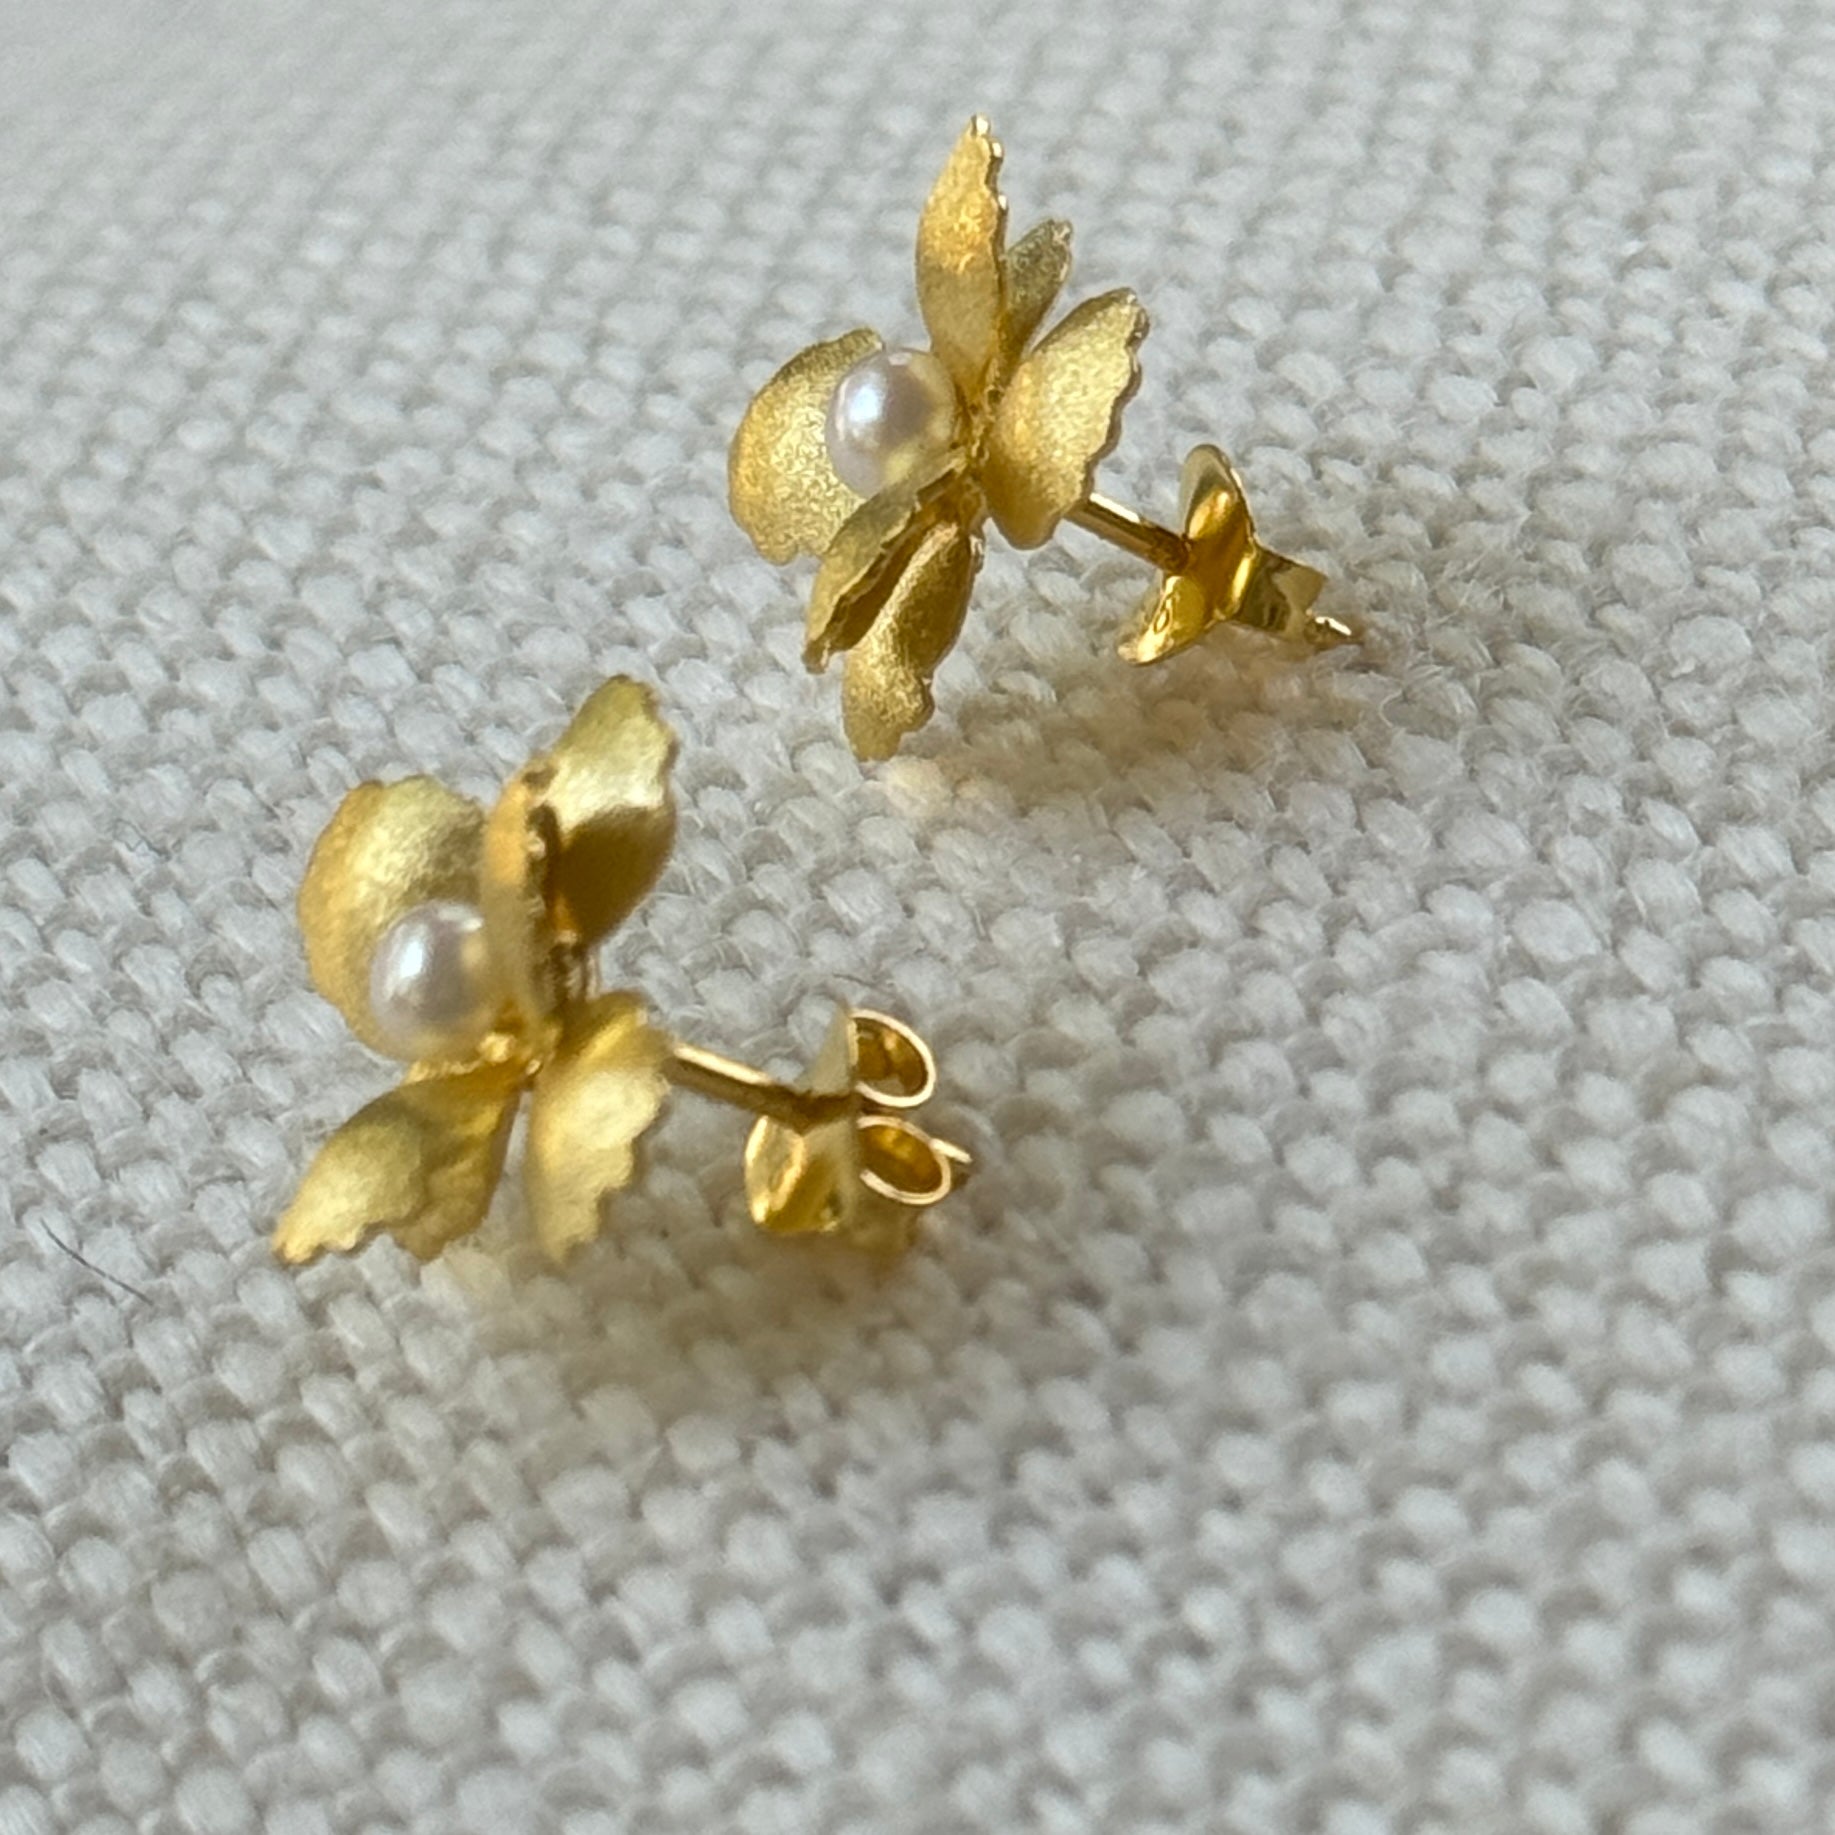 Pearl center Petite Flower Stud (gold or silver)